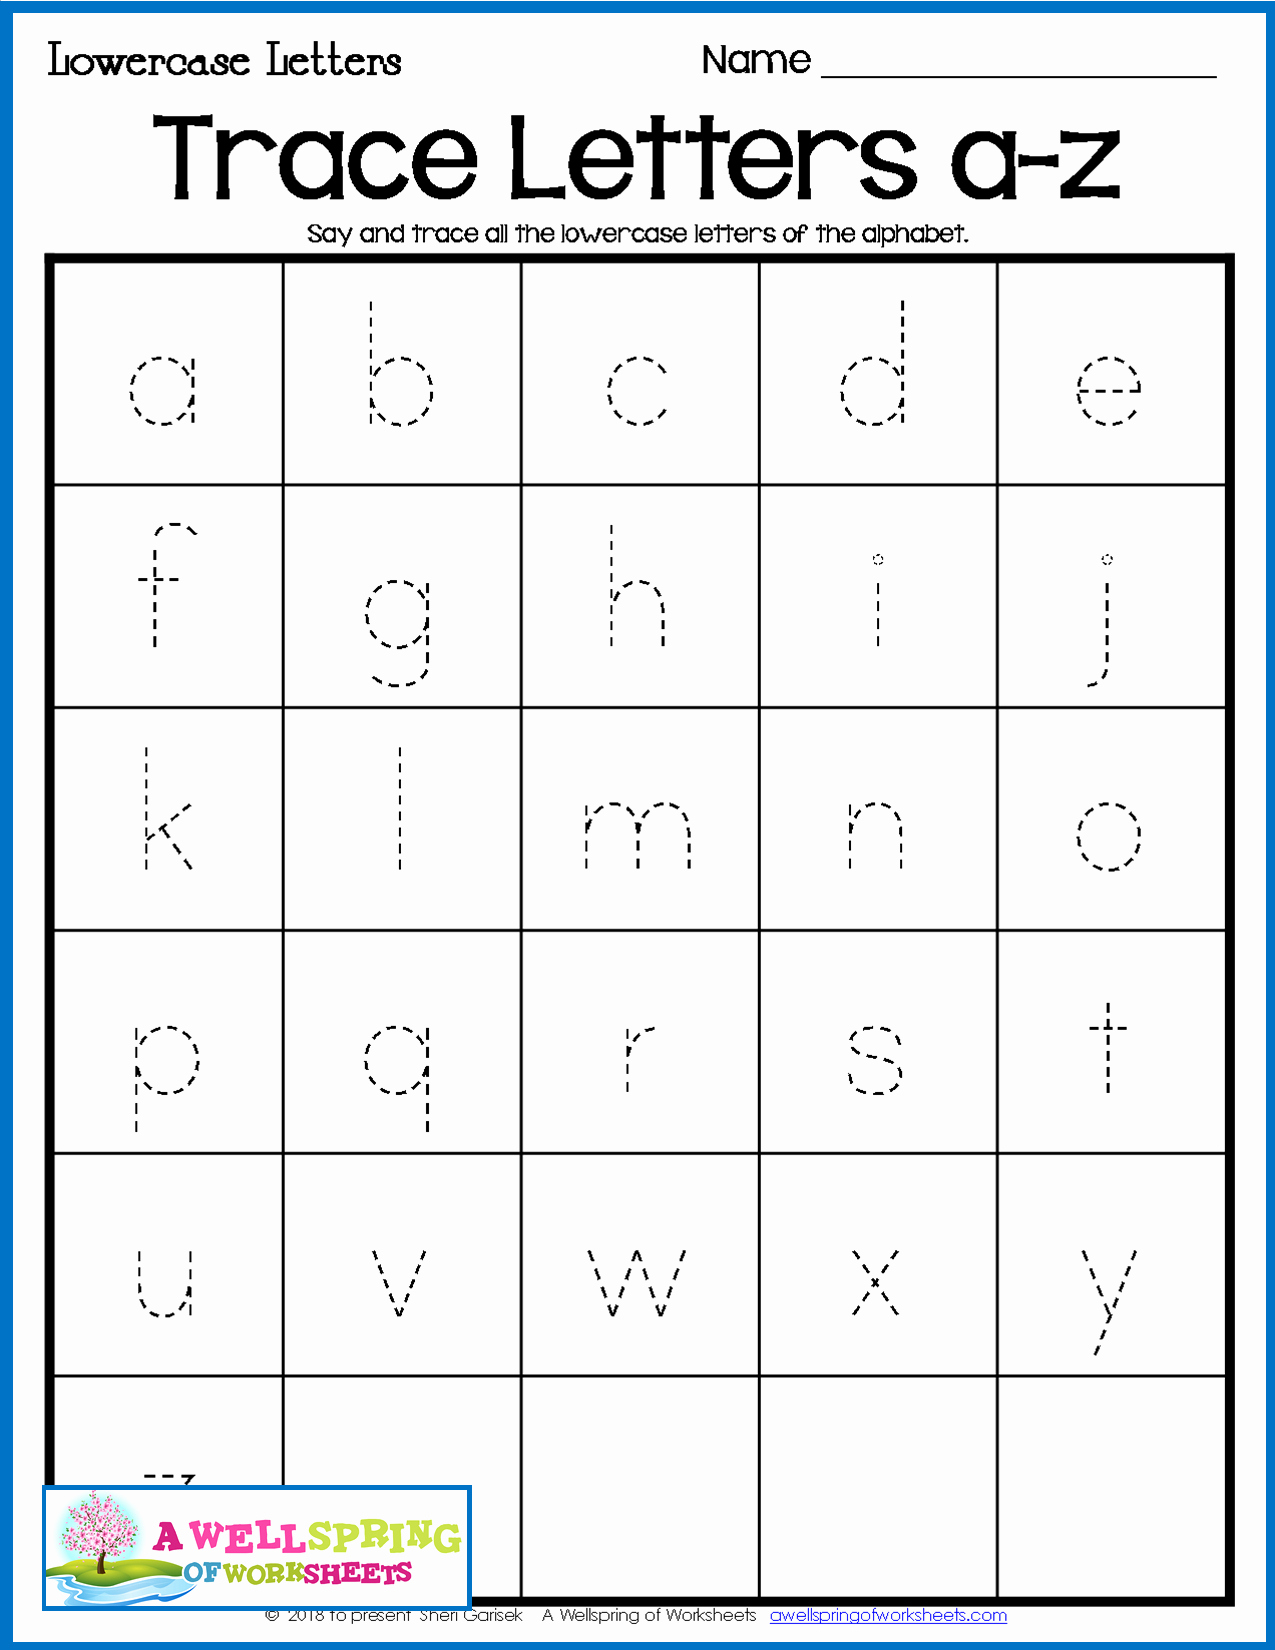 Lowercase Alphabet Tracing Worksheets Luxury Free Printable Tracing Lowercase Letters